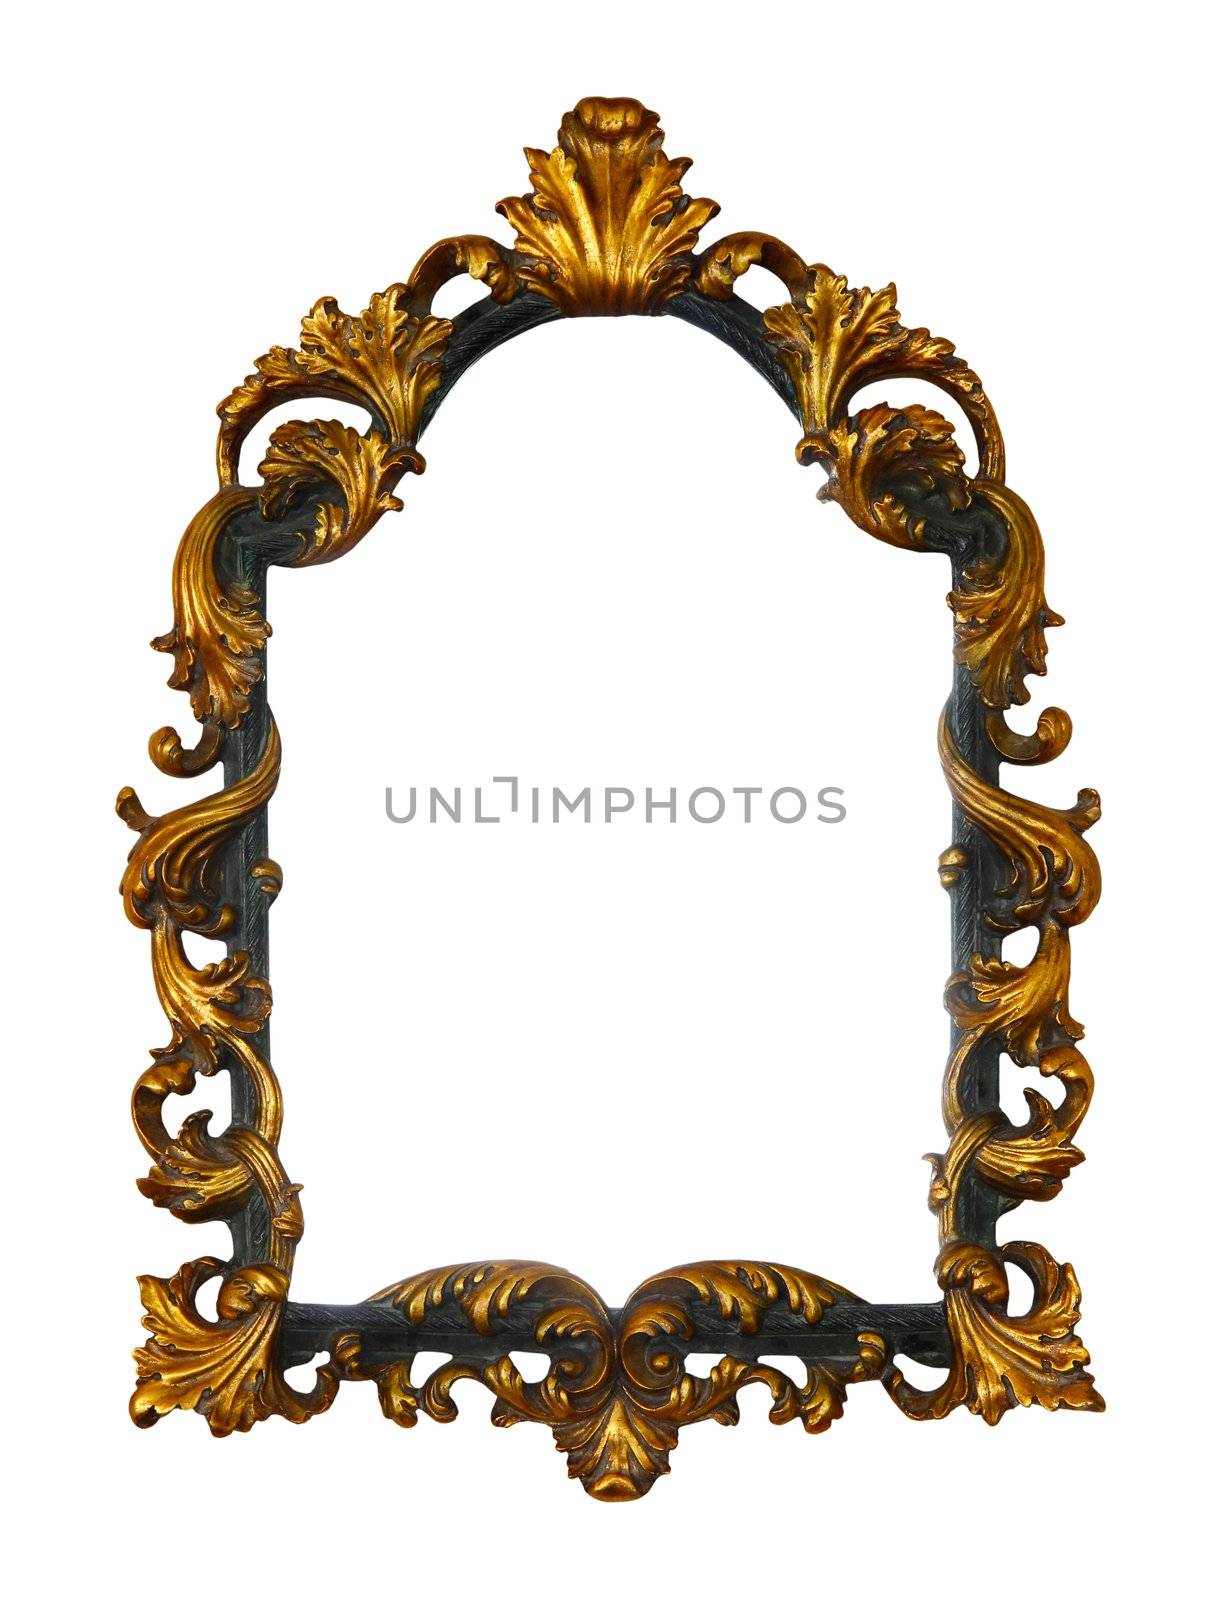 Vintage wooden picture frame isolated on white background